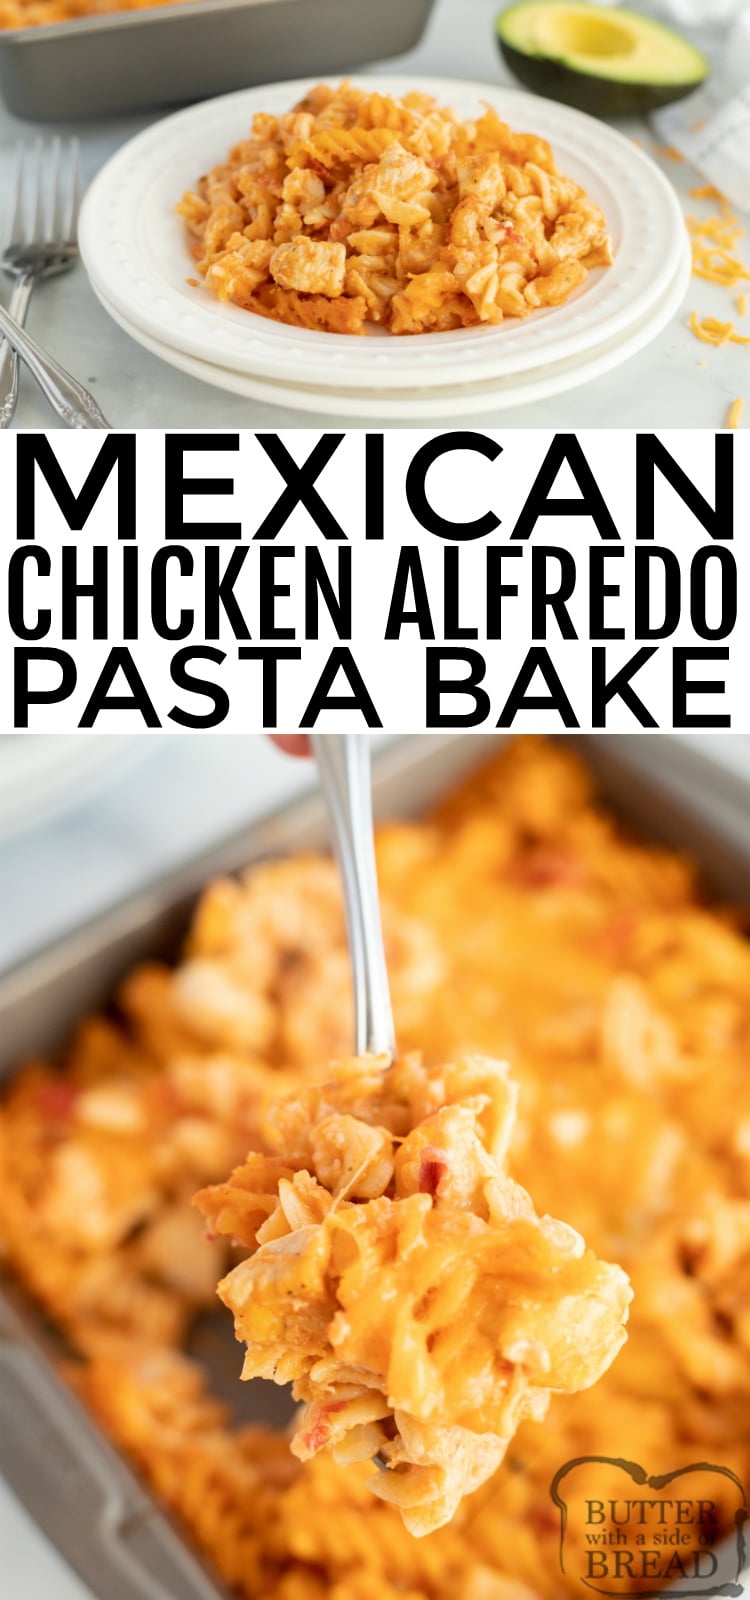 Mexican Chicken Alfredo Pasta Bake is a quick and easy dinner recipe that adds a southwestern twist to chicken alfredo. This baked alfredo recipe includes alfredo sauce, salsa, taco seasoning and lots of cheese! 